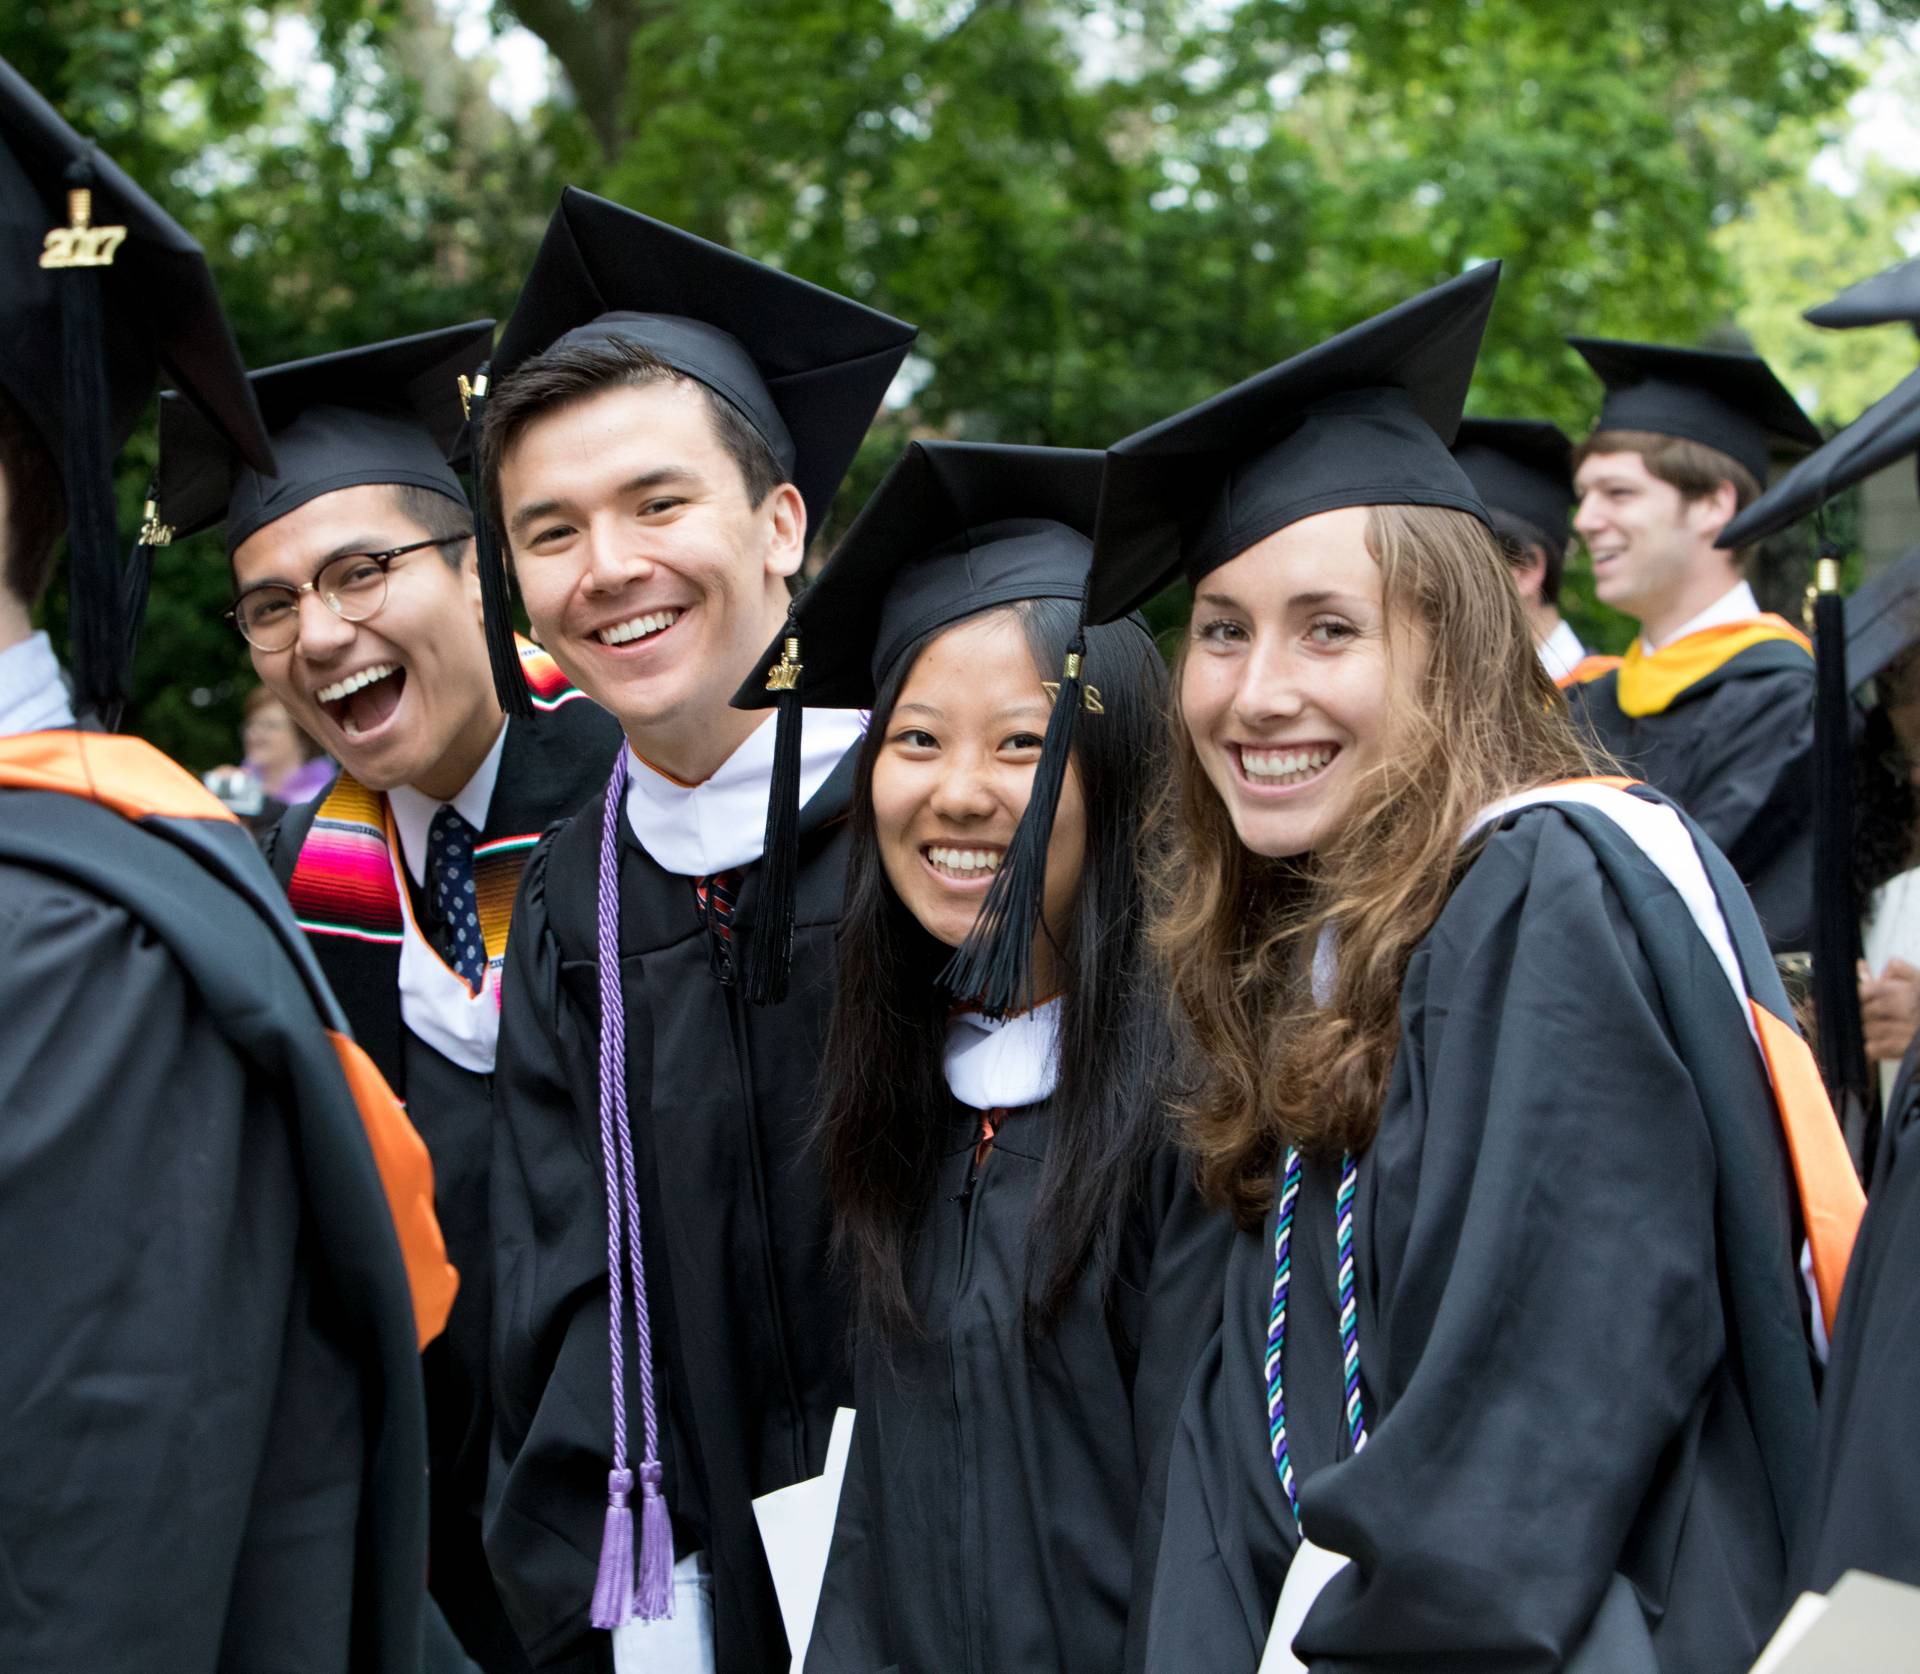 Students smiling during Commencement 2017 ceremony